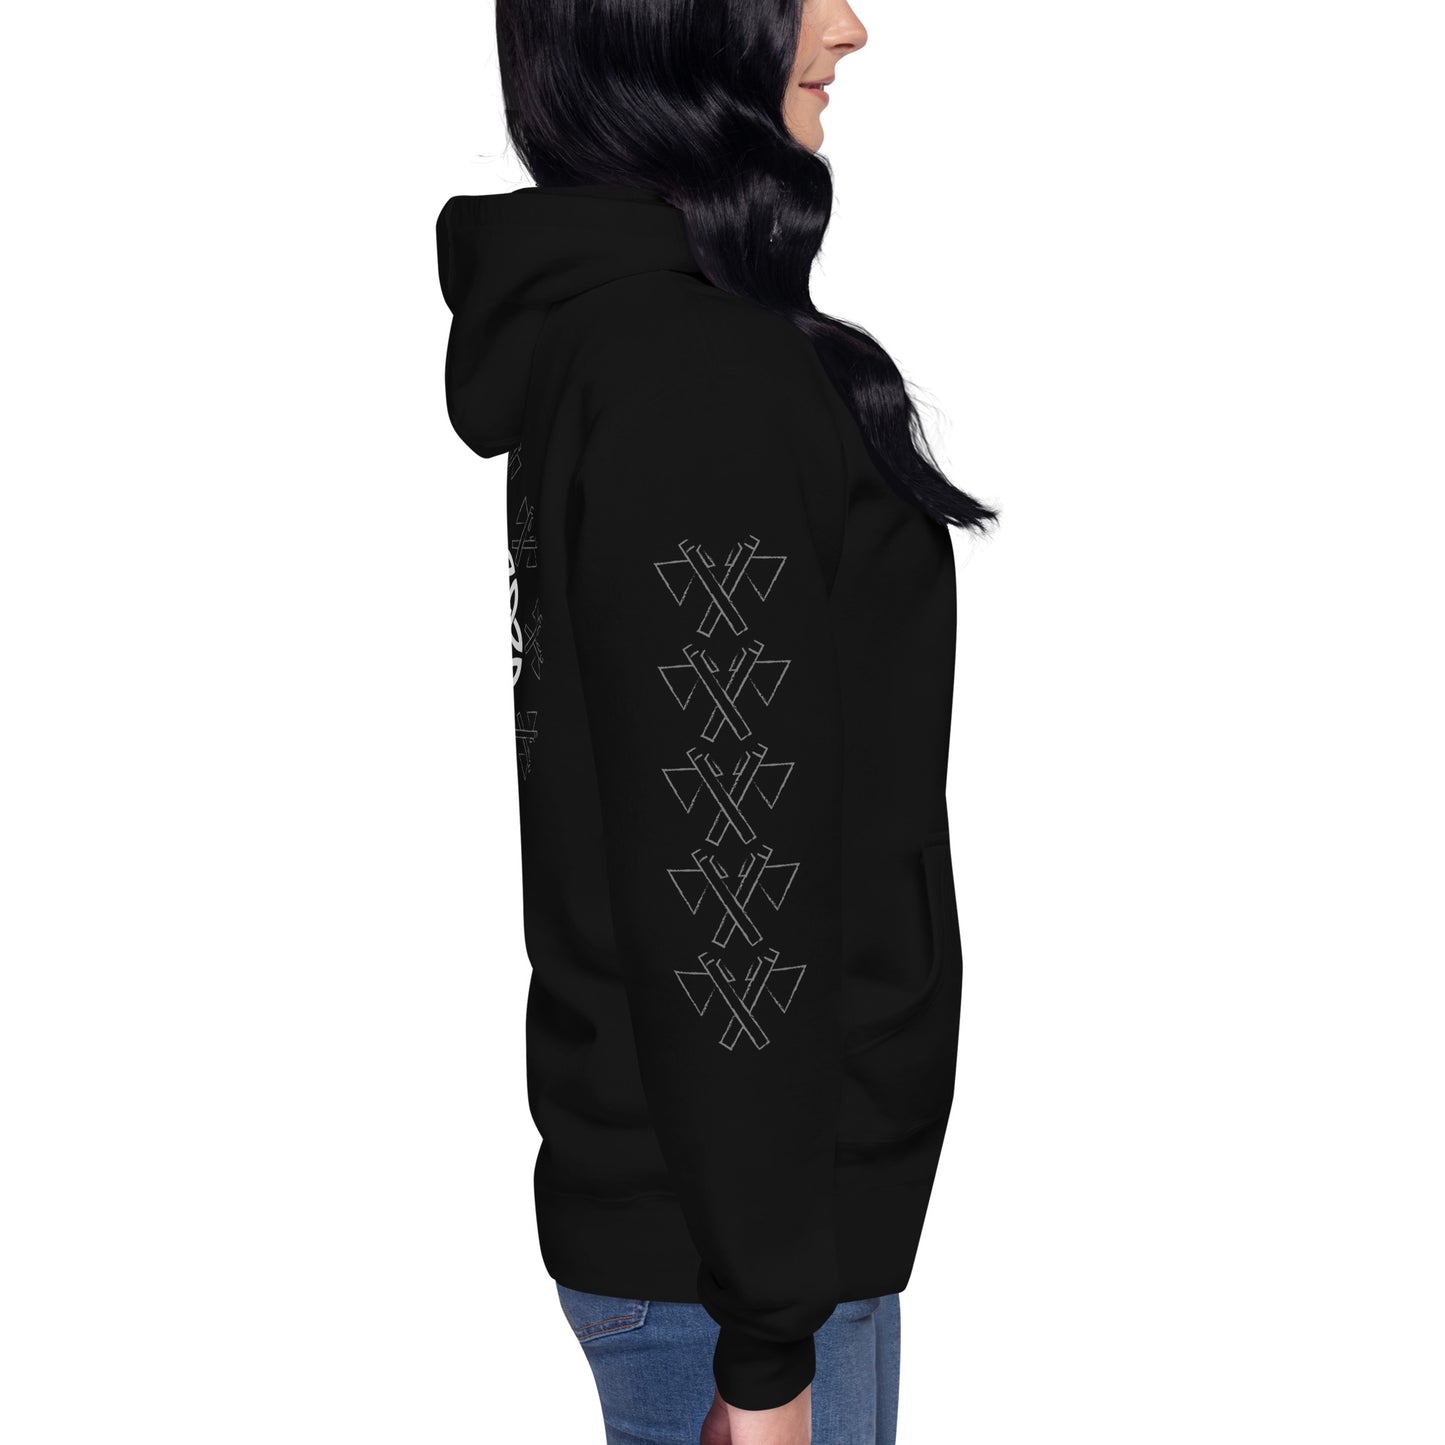 Ornate Celtic Axe Hoodie with Sleeves